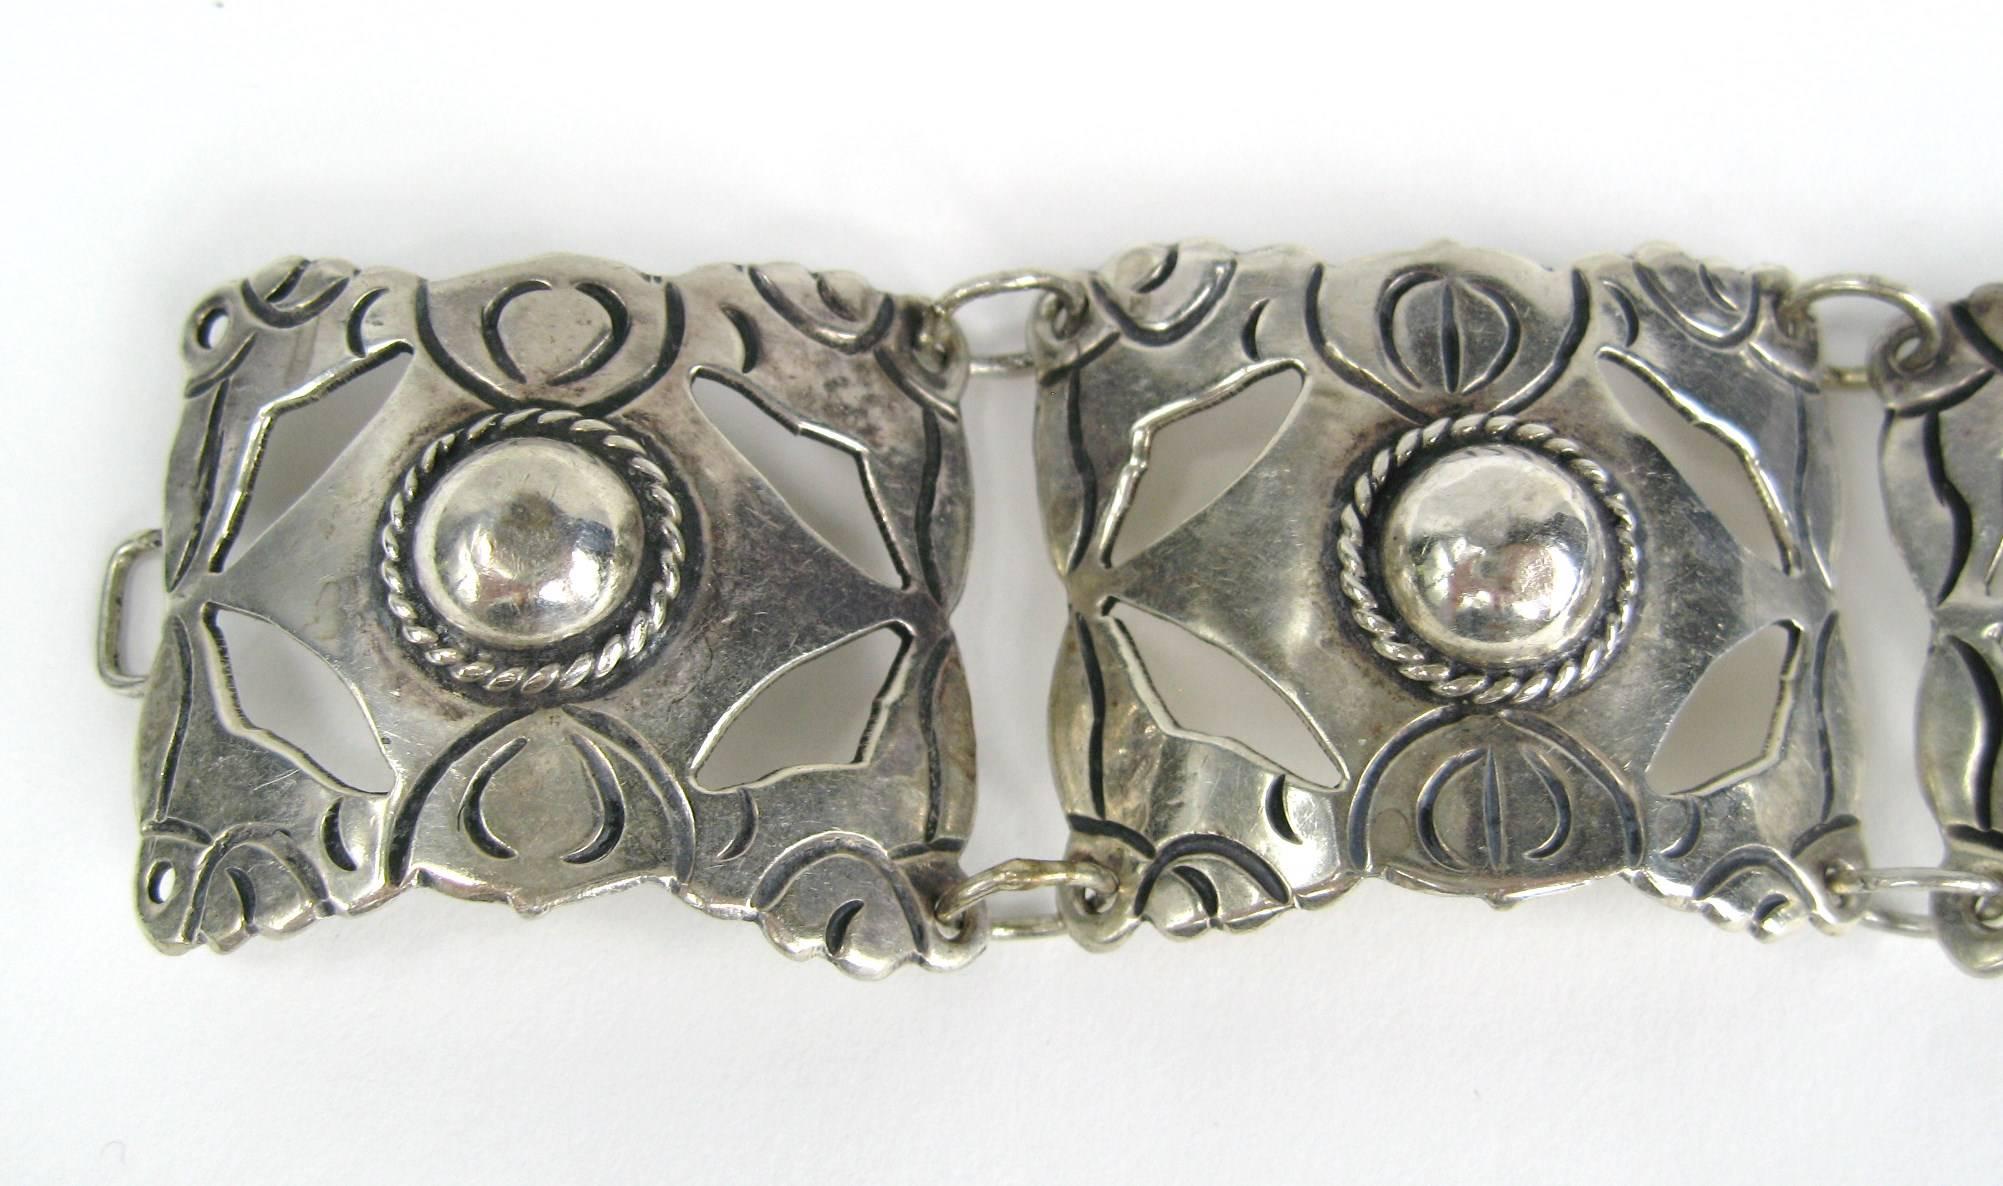 Elaborate Mexican Silver Paneled Bracelet. Outstanding craftsmanship on this piece. Hallmarked on clasp. Measuring 1.36 inches wide with 4 panels. Early Mexican Craftsmanship. Measuring approx 7.25 inches end to end. Will fit a 6.5 to 7-inch wrist